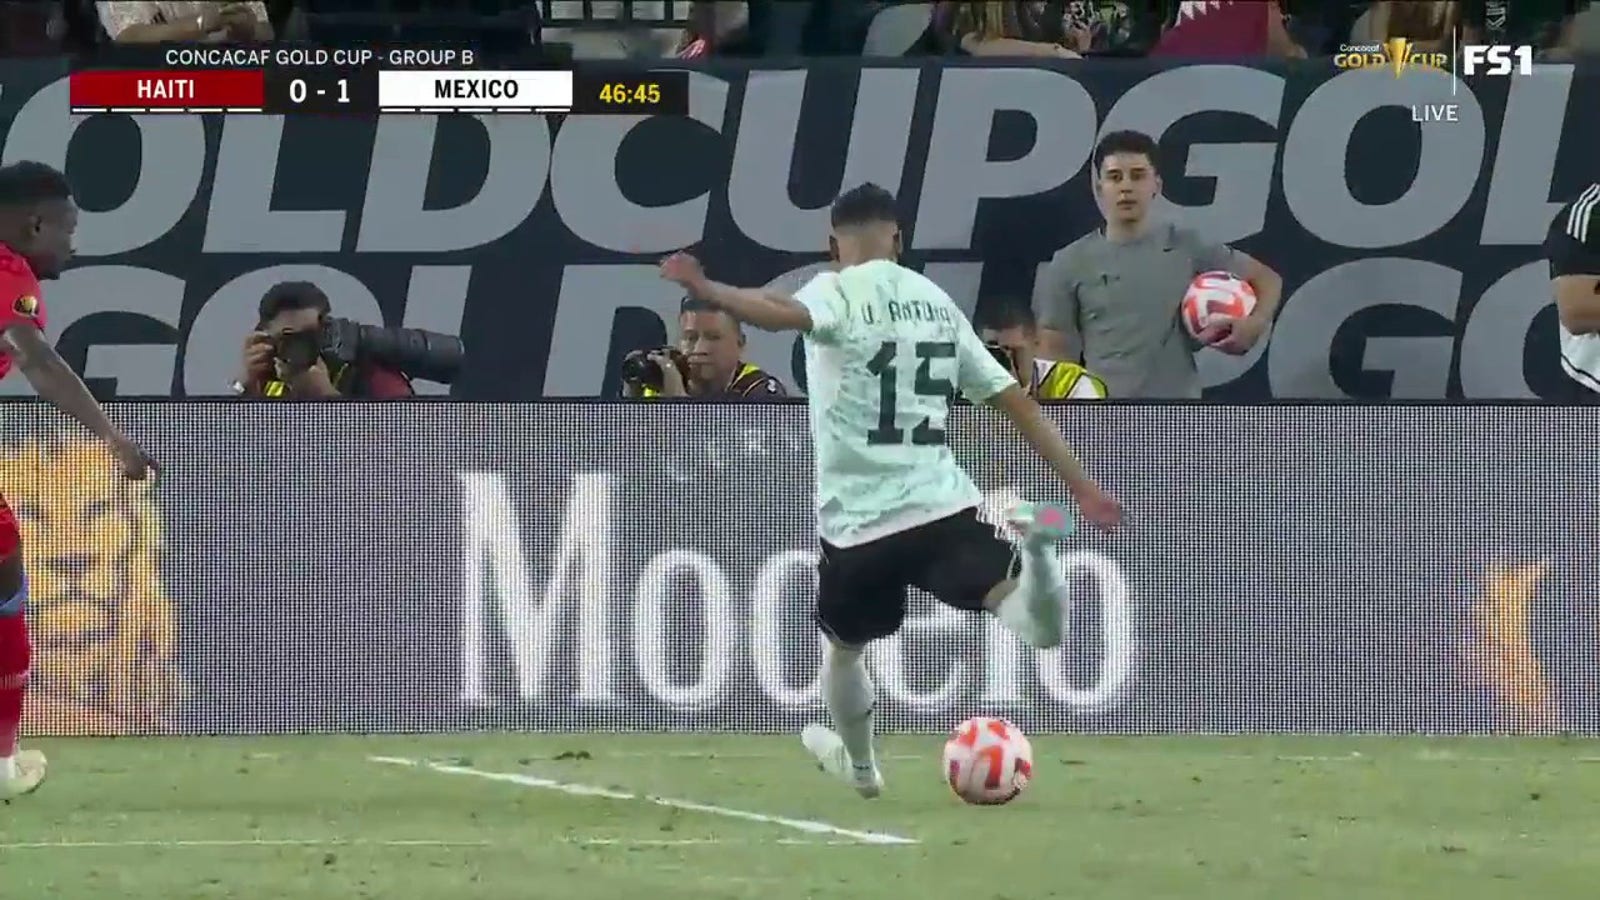 Henry Martín, Uriel Antuna connect for a beautiful goal for Mexico